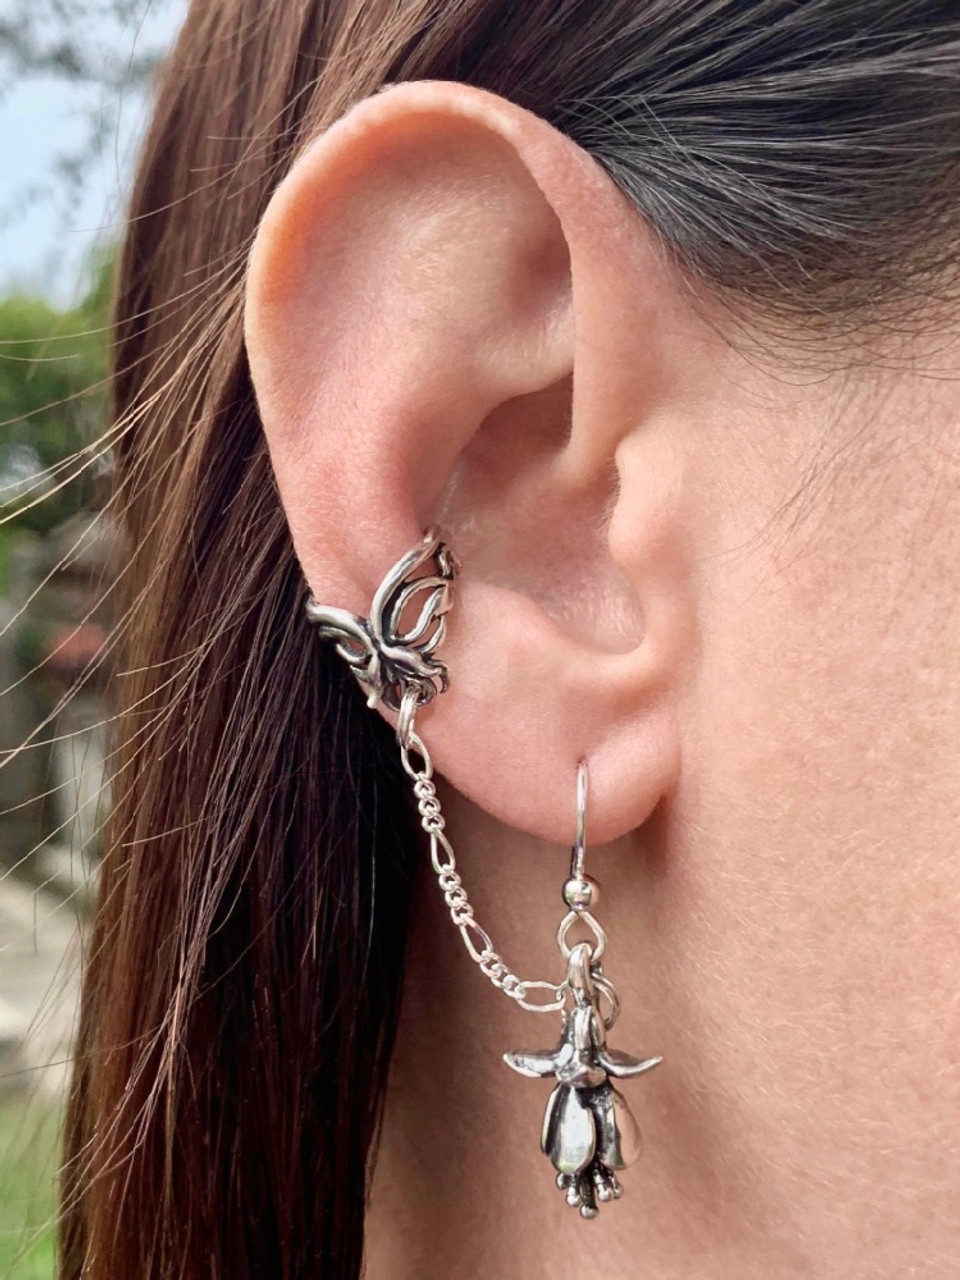 Everything You Need to Know About Ear Cuff Earrings - Body Pierce Jewelry